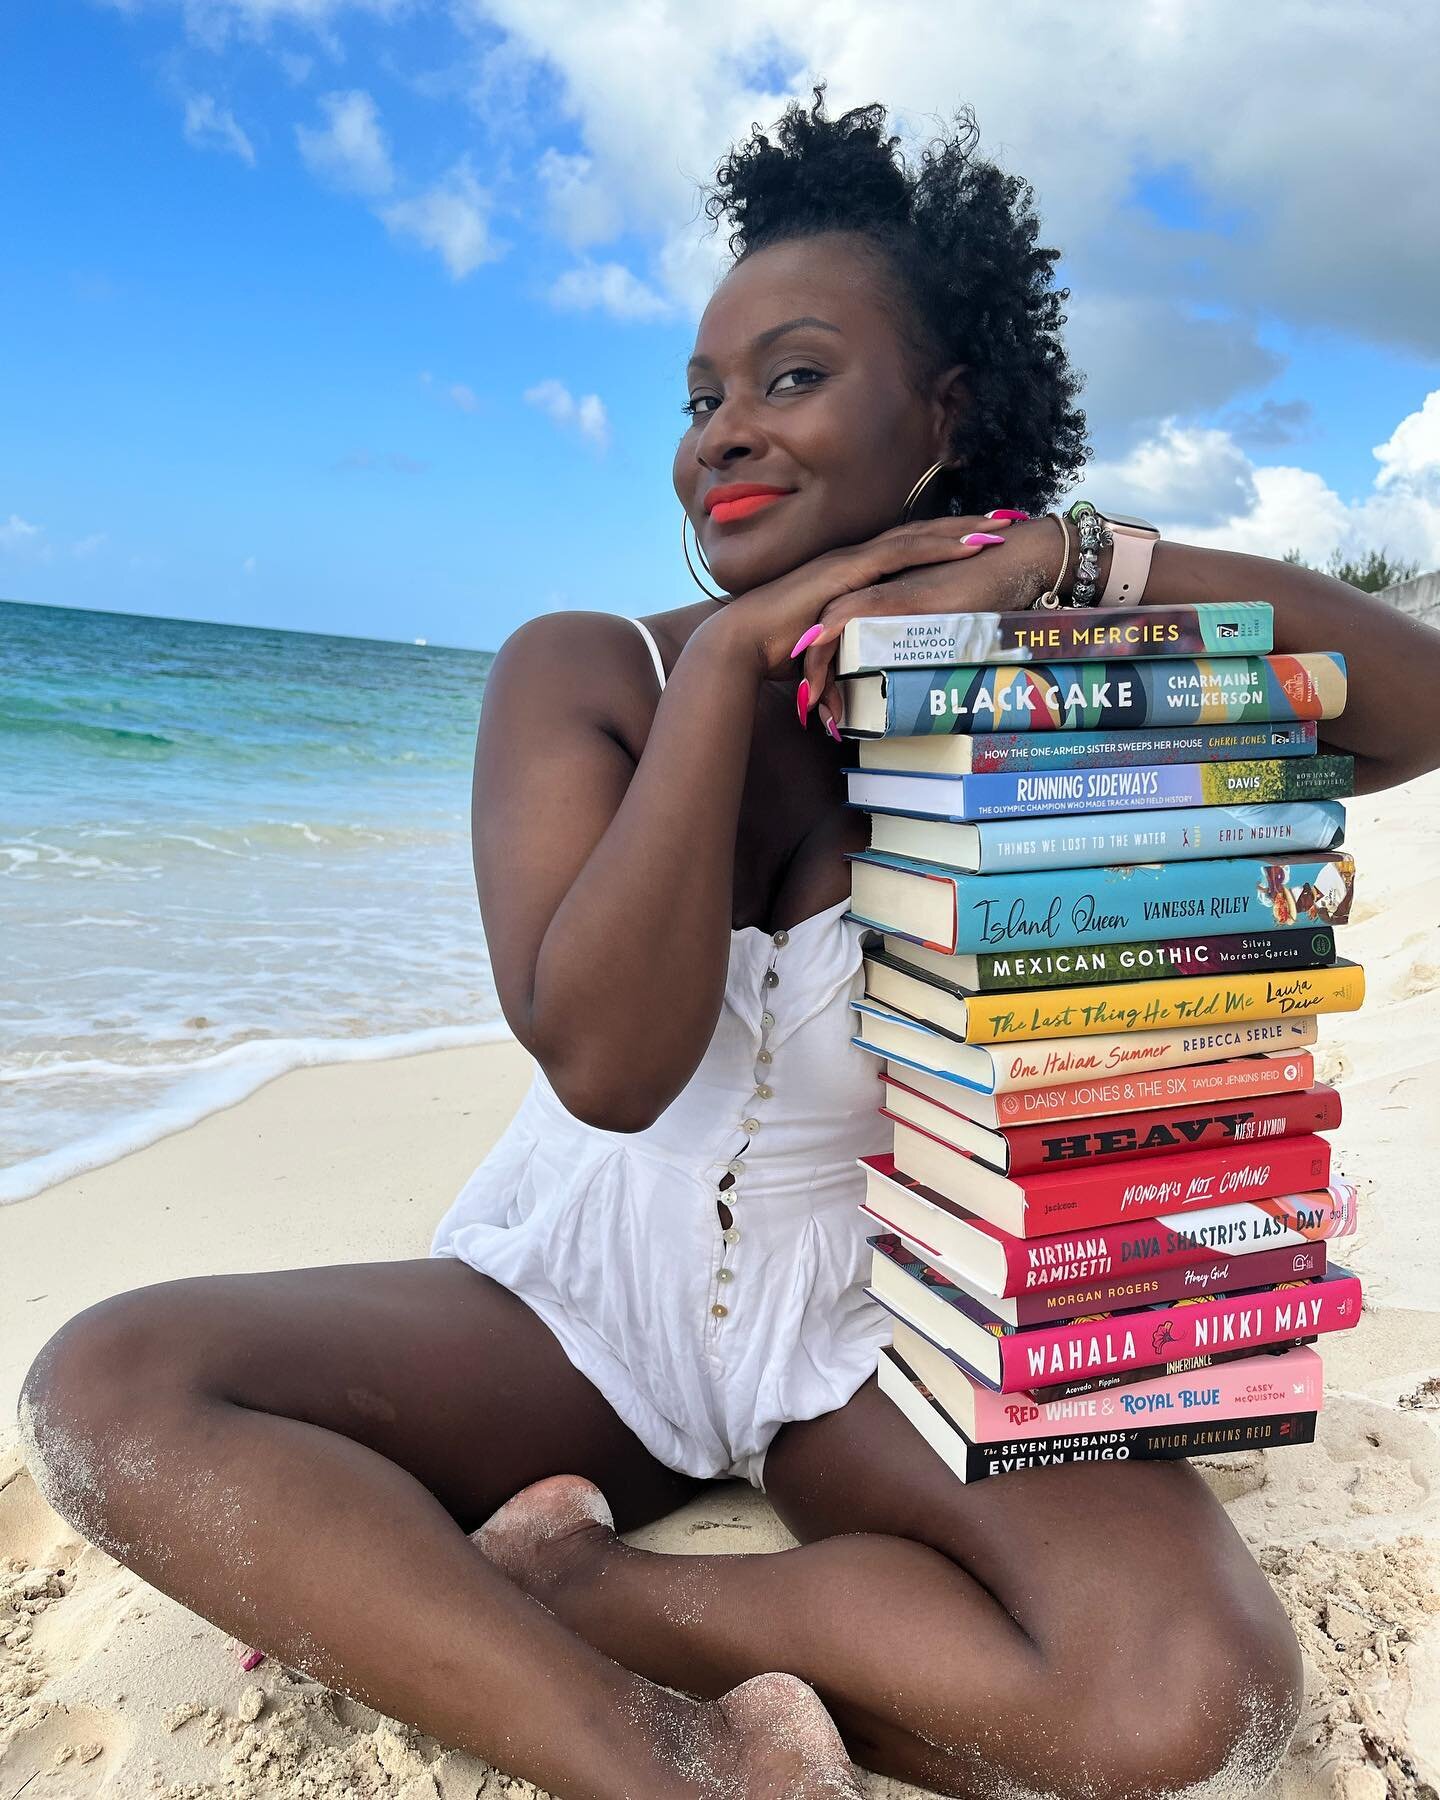 If you&rsquo;re here for my #barelybookstagram content, this post is for you. This year I set a pretty ambitious reading goal of 50 books and now that we&rsquo;re more than halfway through the year, I figure I&rsquo;d provide an update. 

So far, I&r